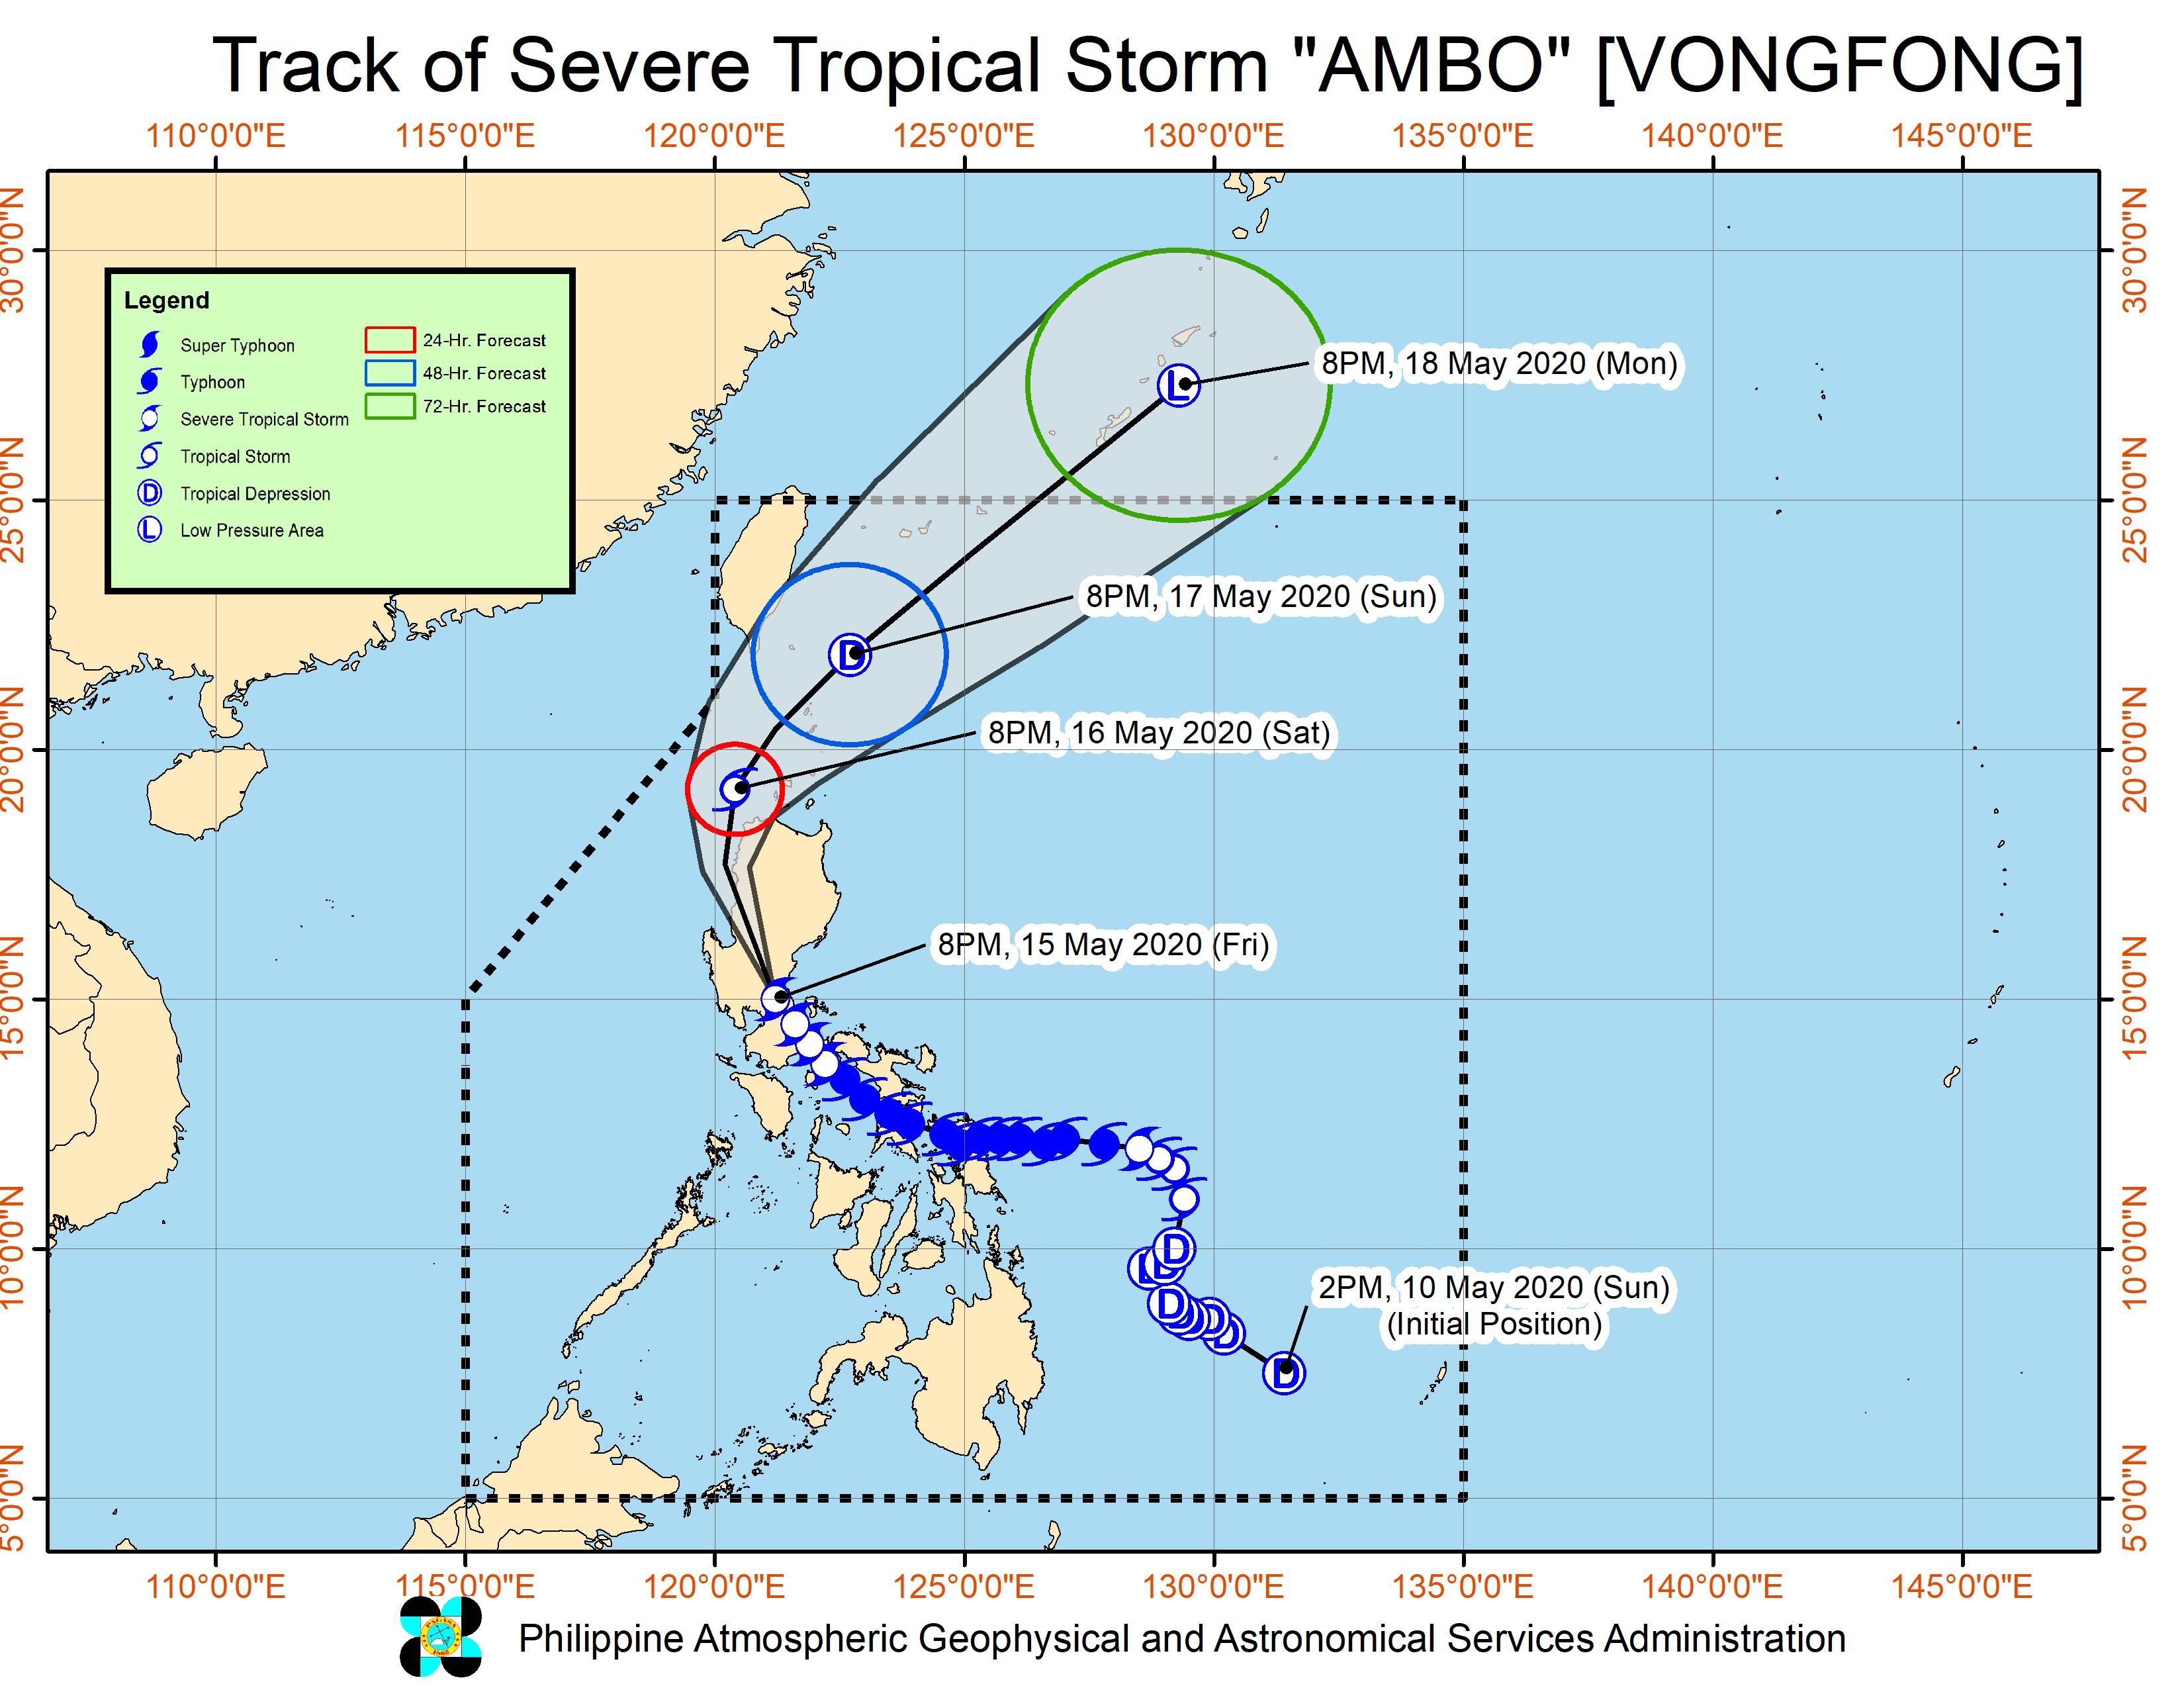 Forecast track of Severe Tropical Storm Ambo (Vongfong) as of May 15, 2020, 11 pm. Image from PAGASA 